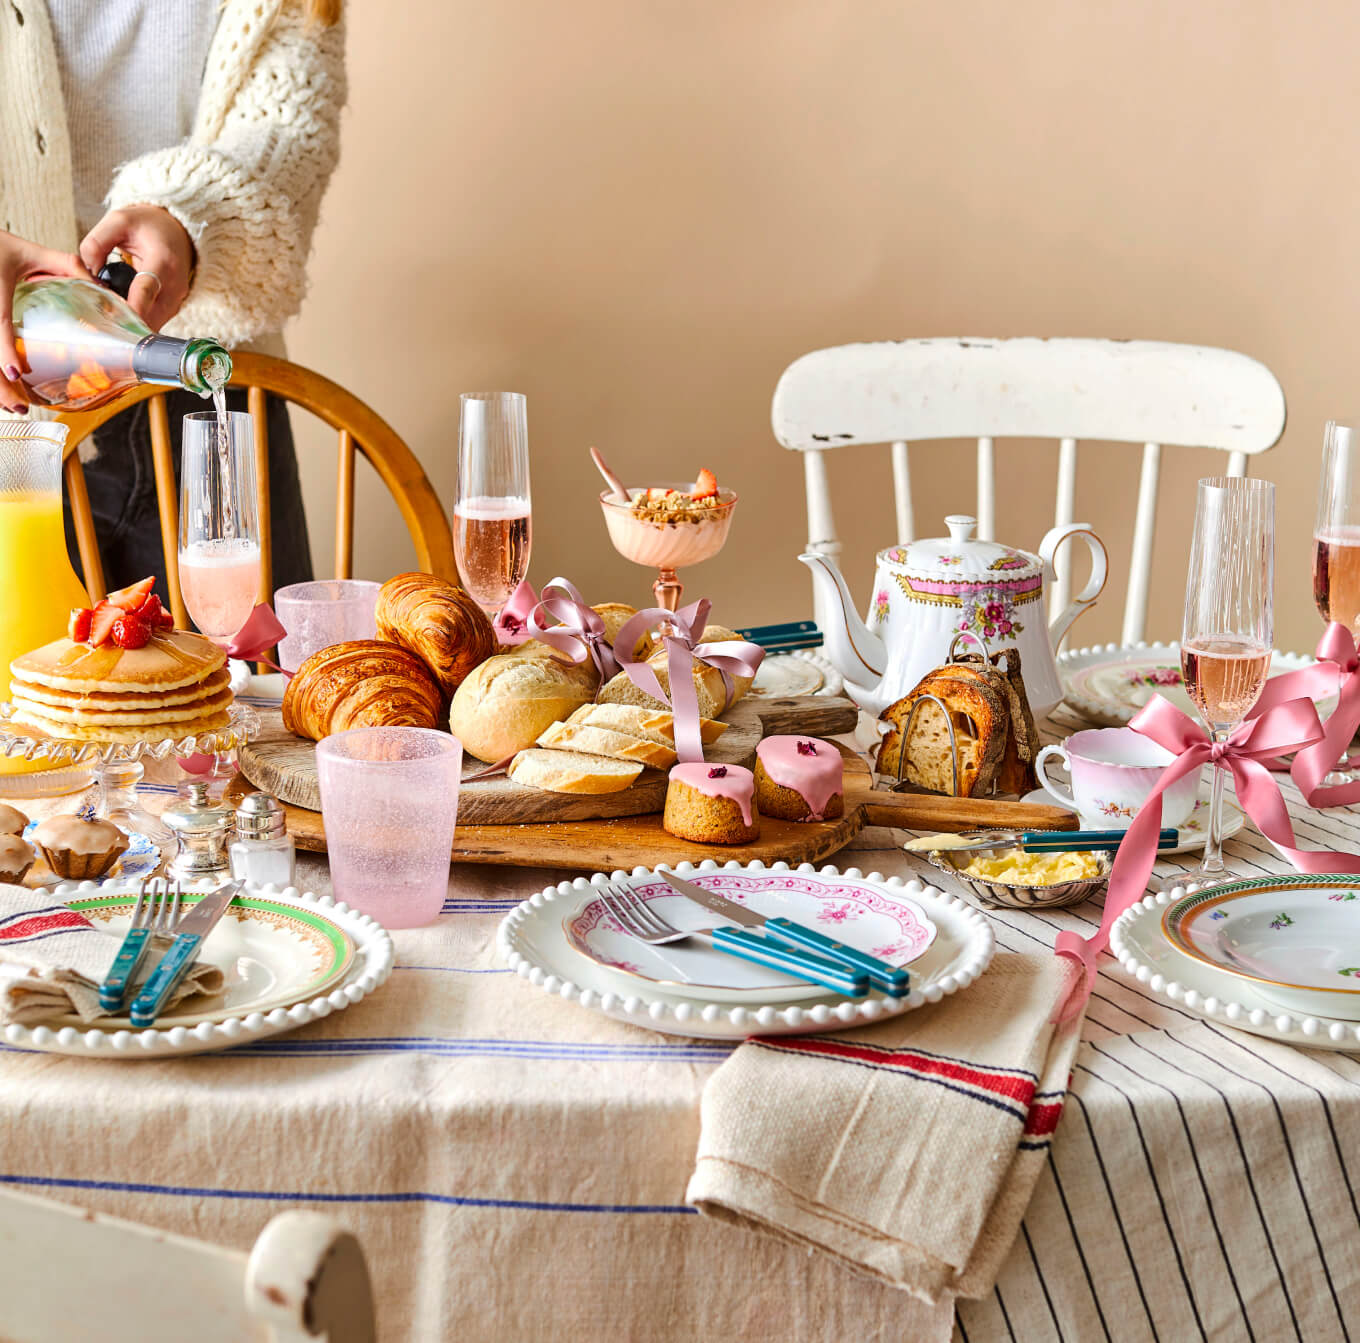 Beautiful brunch spread on a table with tea, cakes, champagne and vintage china